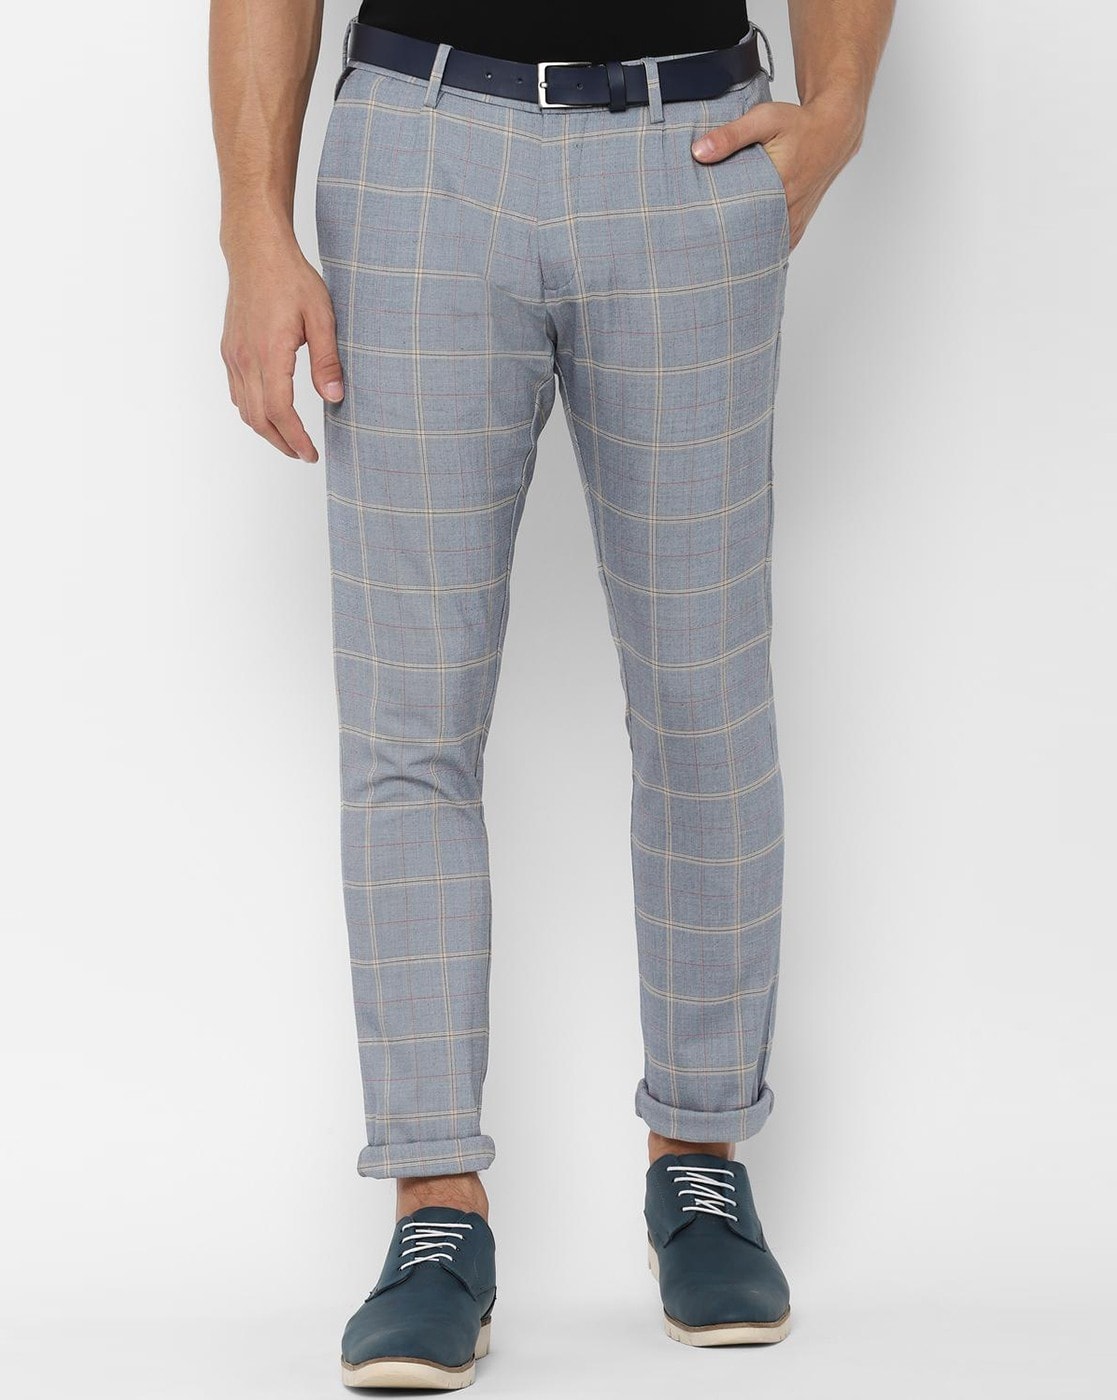 Buy Men Blue Slim Fit Check Casual Trousers Online  756278  Allen Solly